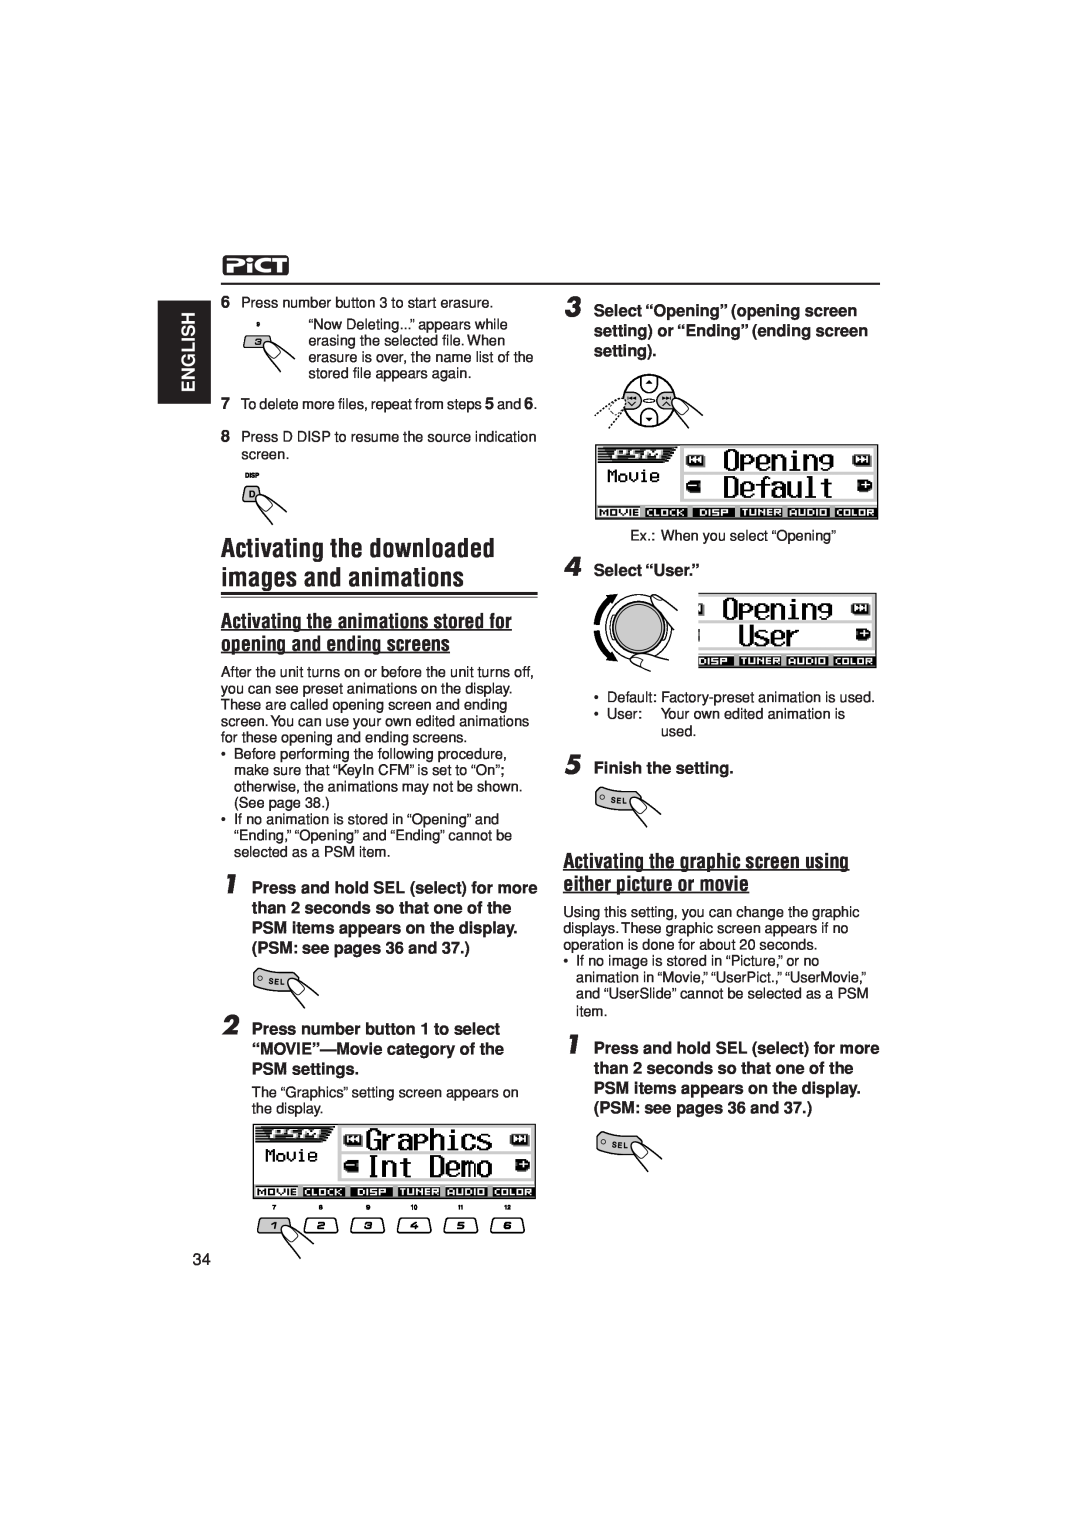 JVC KD-LH305 manual Activating the downloaded images and animations, English, Select “Opening” opening screen, setting 